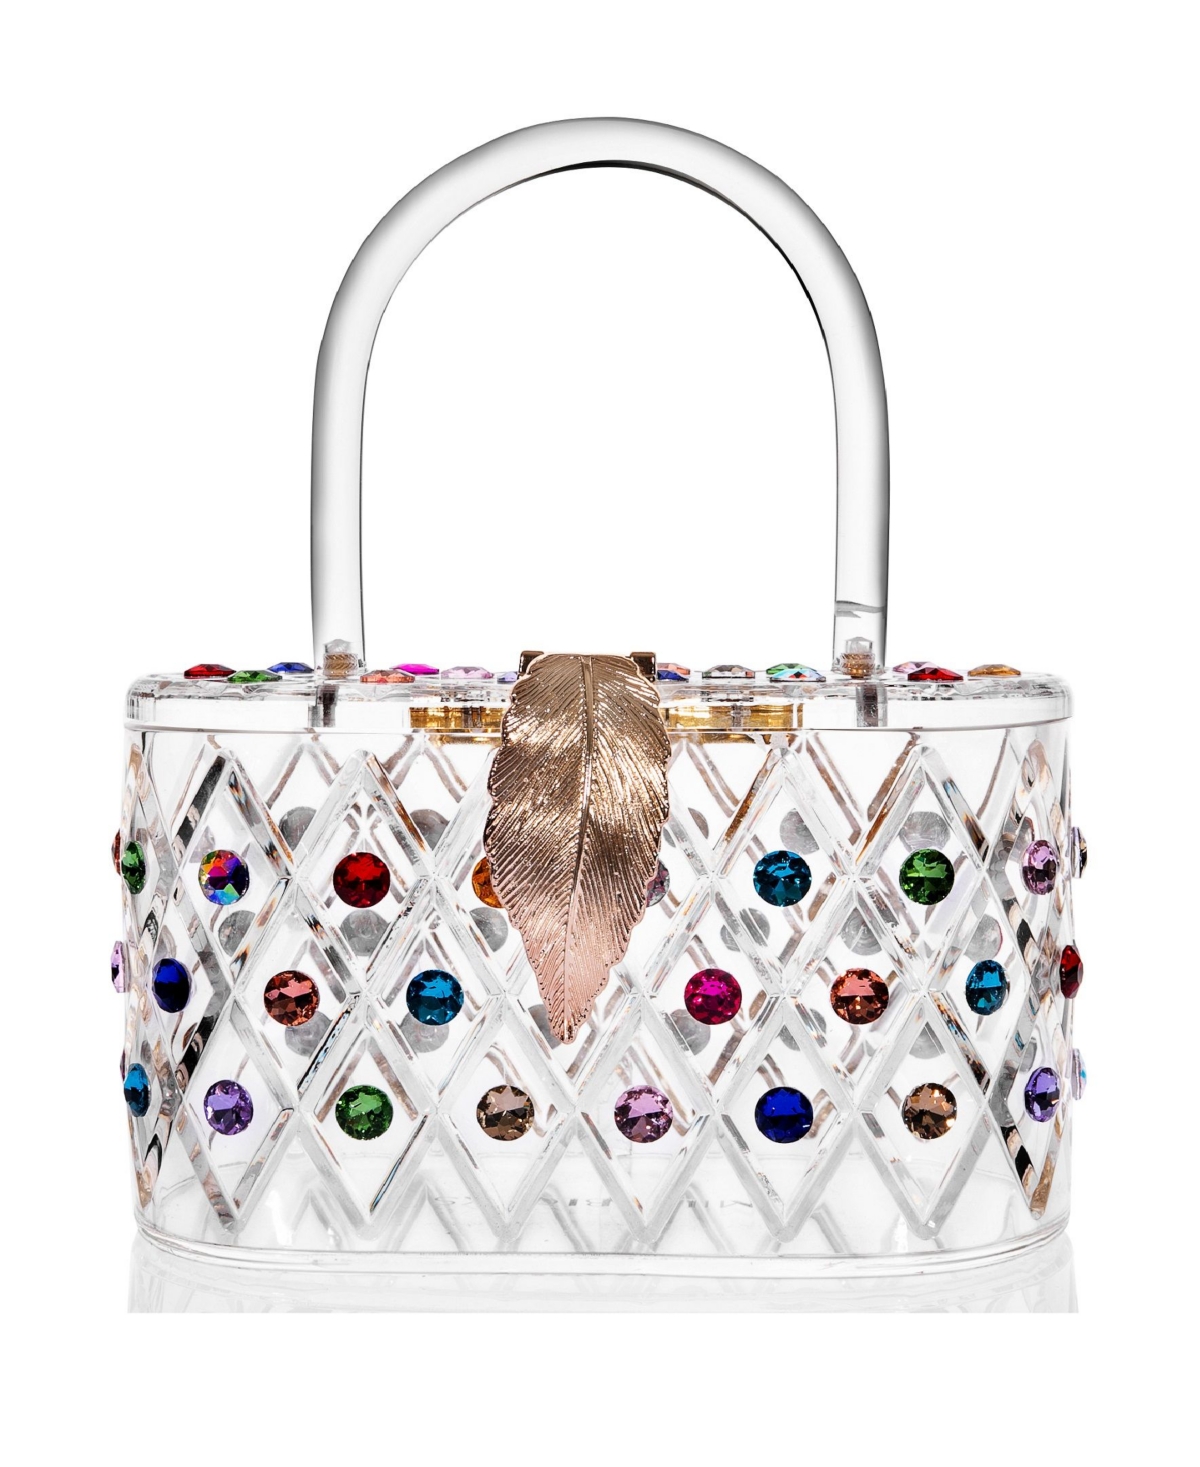 "The Queen" Rainbow Colorful Crystal Lucite Box Clutch Bag - Clear